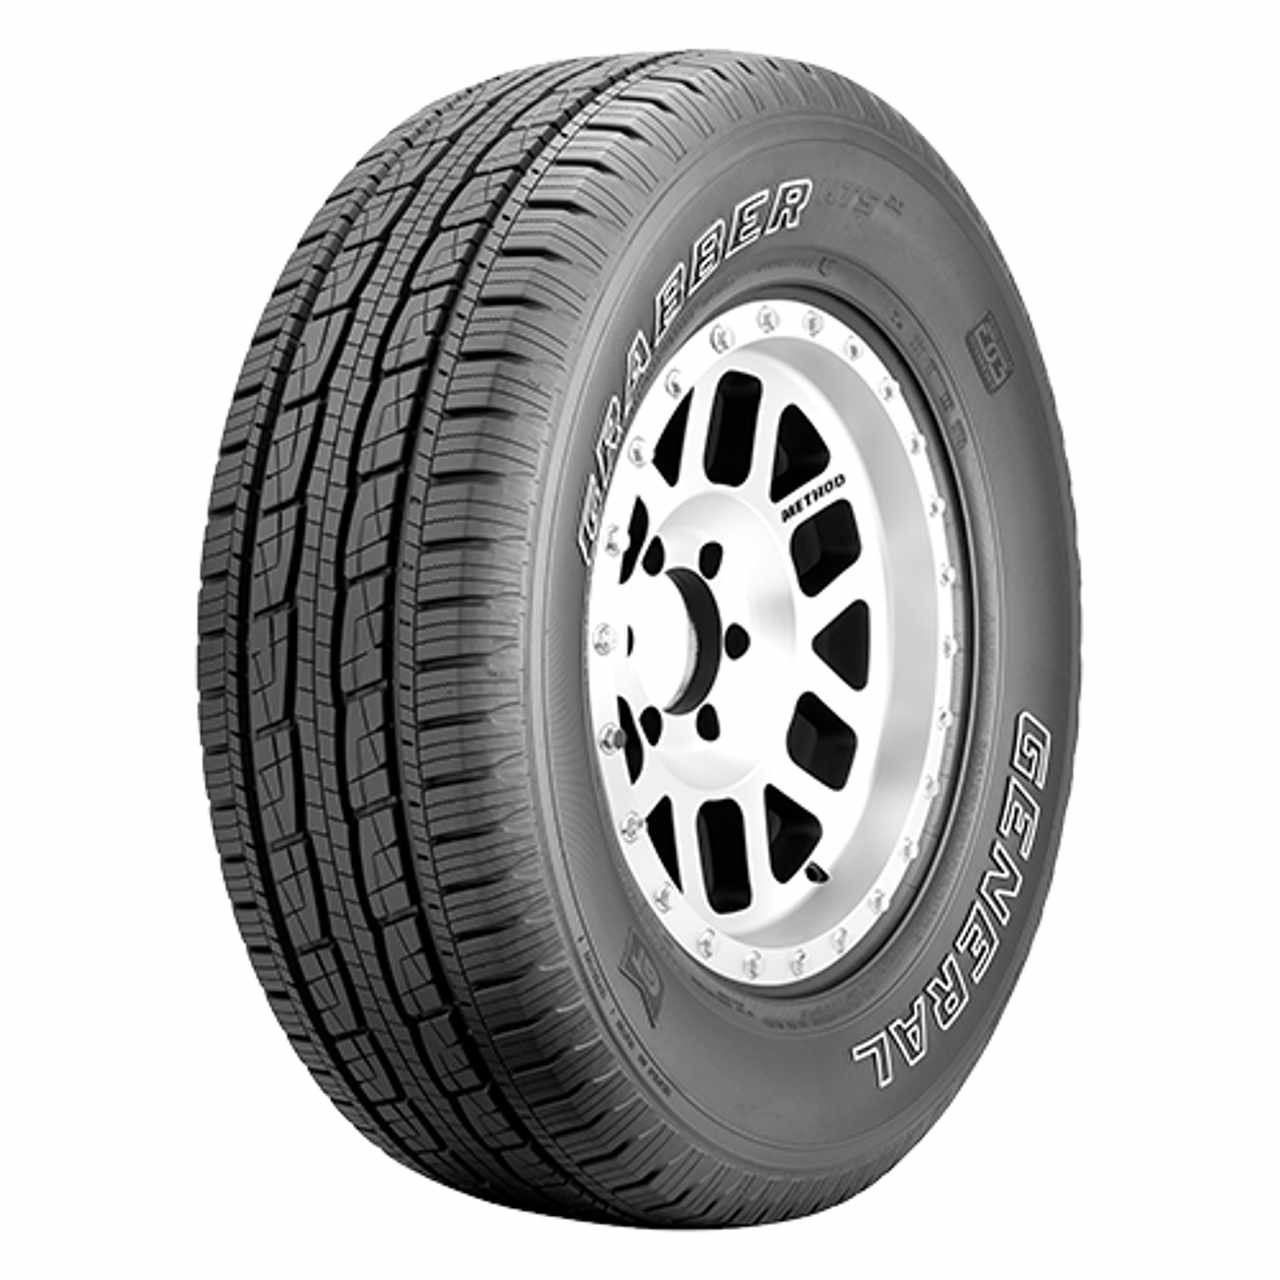 GENERAL TIRE GRABBER HTS60 (MO1) (A) 275/50R20 113H FR BSW